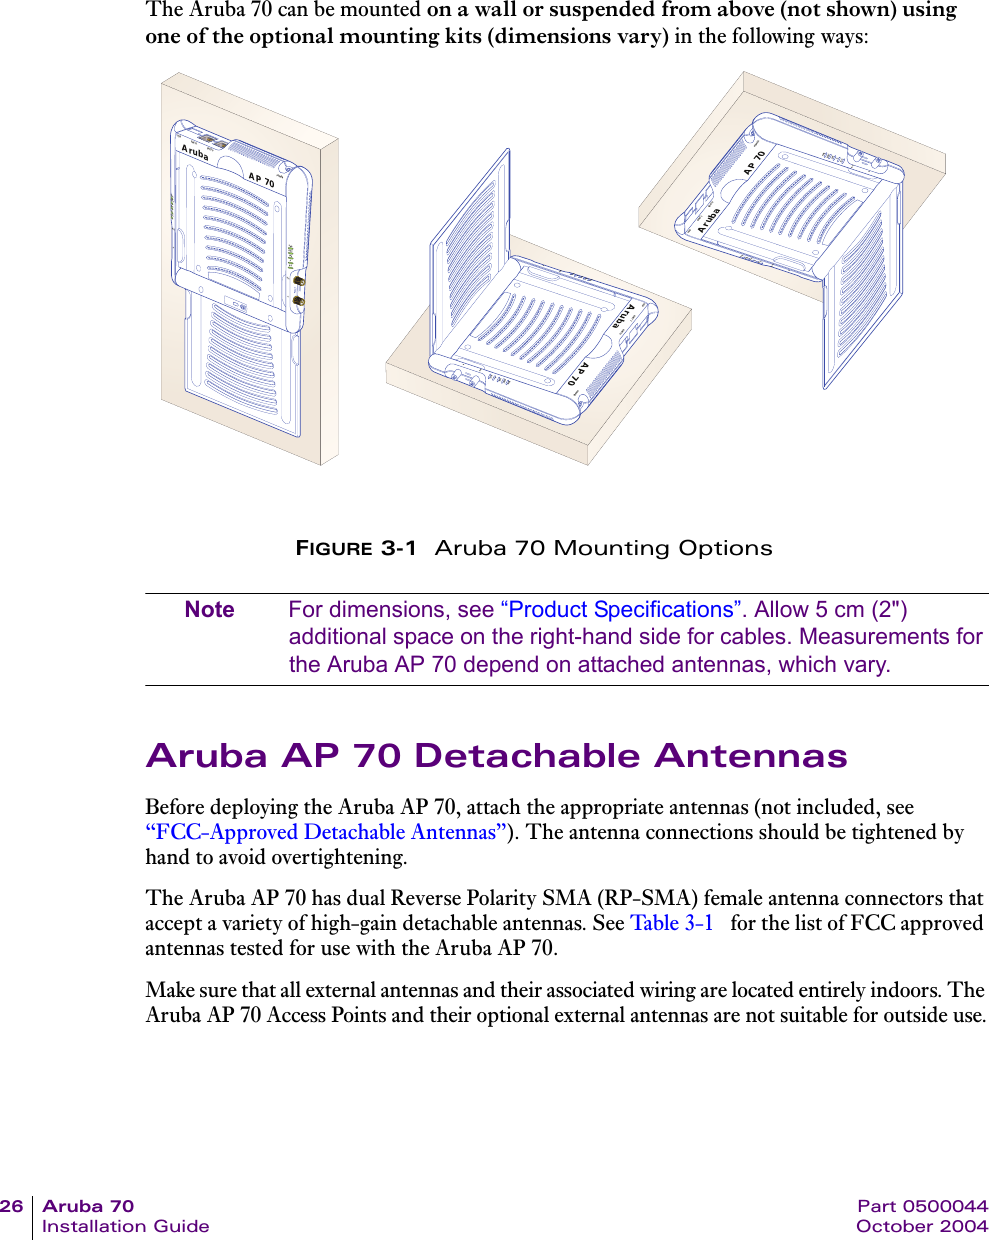 26 Aruba 70 Part 0500044Installation Guide October 2004The Aruba 70 can be mounted on a wall or suspended from above (not shown) using one of the optional mounting kits (dimensions vary) in the following ways:FIGURE 3-1  Aruba 70 Mounting OptionsNote For dimensions, see “Product Specifications”. Allow 5 cm (2&quot;) additional space on the right-hand side for cables. Measurements for the Aruba AP 70 depend on attached antennas, which vary.Aruba AP 70 Detachable AntennasBefore deploying the Aruba AP 70, attach the appropriate antennas (not included, see “FCC-Approved Detachable Antennas”). The antenna connections should be tightened by hand to avoid overtightening.The Aruba AP 70 has dual Reverse Polarity SMA (RP-SMA) female antenna connectors that accept a variety of high-gain detachable antennas. See Ta bl e 3 - 1  for the list of FCC approved antennas tested for use with the Aruba AP 70.Make sure that all external antennas and their associated wiring are located entirely indoors. The Aruba AP 70 Access Points and their optional external antennas are not suitable for outside use.AP 70ArubaUSB ENET 1 ENET 0 POWERPWRENETLNKAAB/GB/GWRNETNKAB/GAB/GAP 70ArubaUSB ENET 1 ENET 0 POWERPWRENETLNKAAB/GB/GWRNETNKAB/GAB/GAP 70ArubaUSB ENET 1 ENET 0 POWERPWRENETLNKAAB/GB/GWRNETNKAB/GAB/G